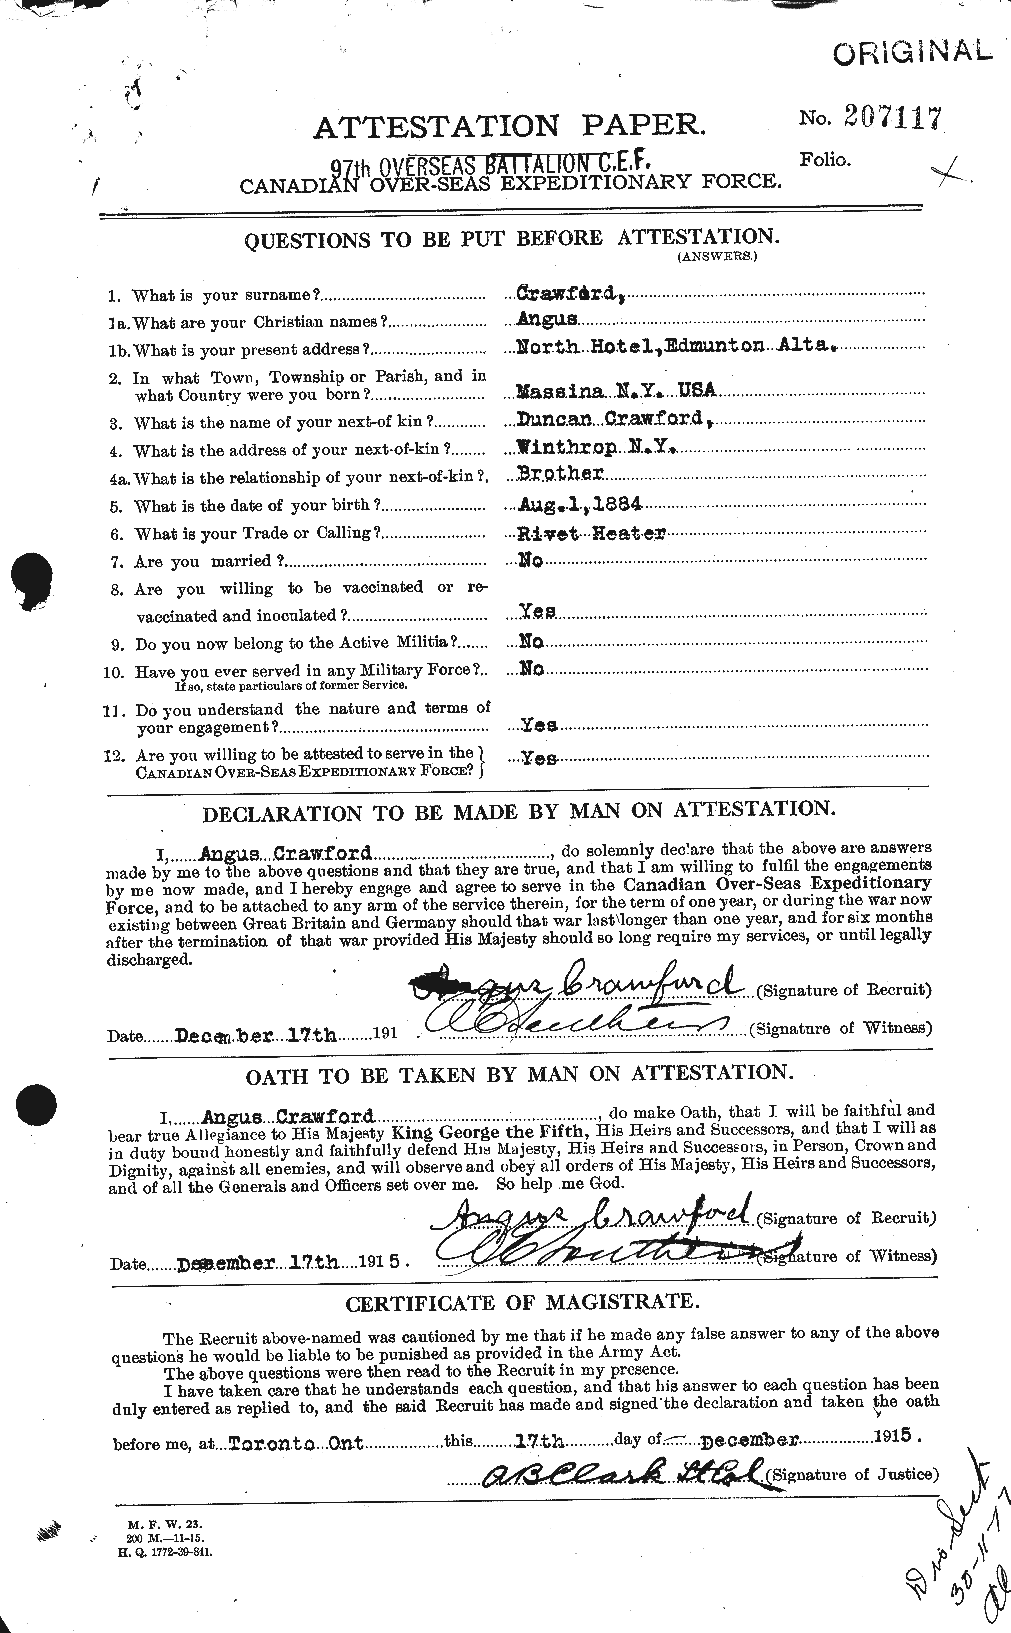 Personnel Records of the First World War - CEF 060942a